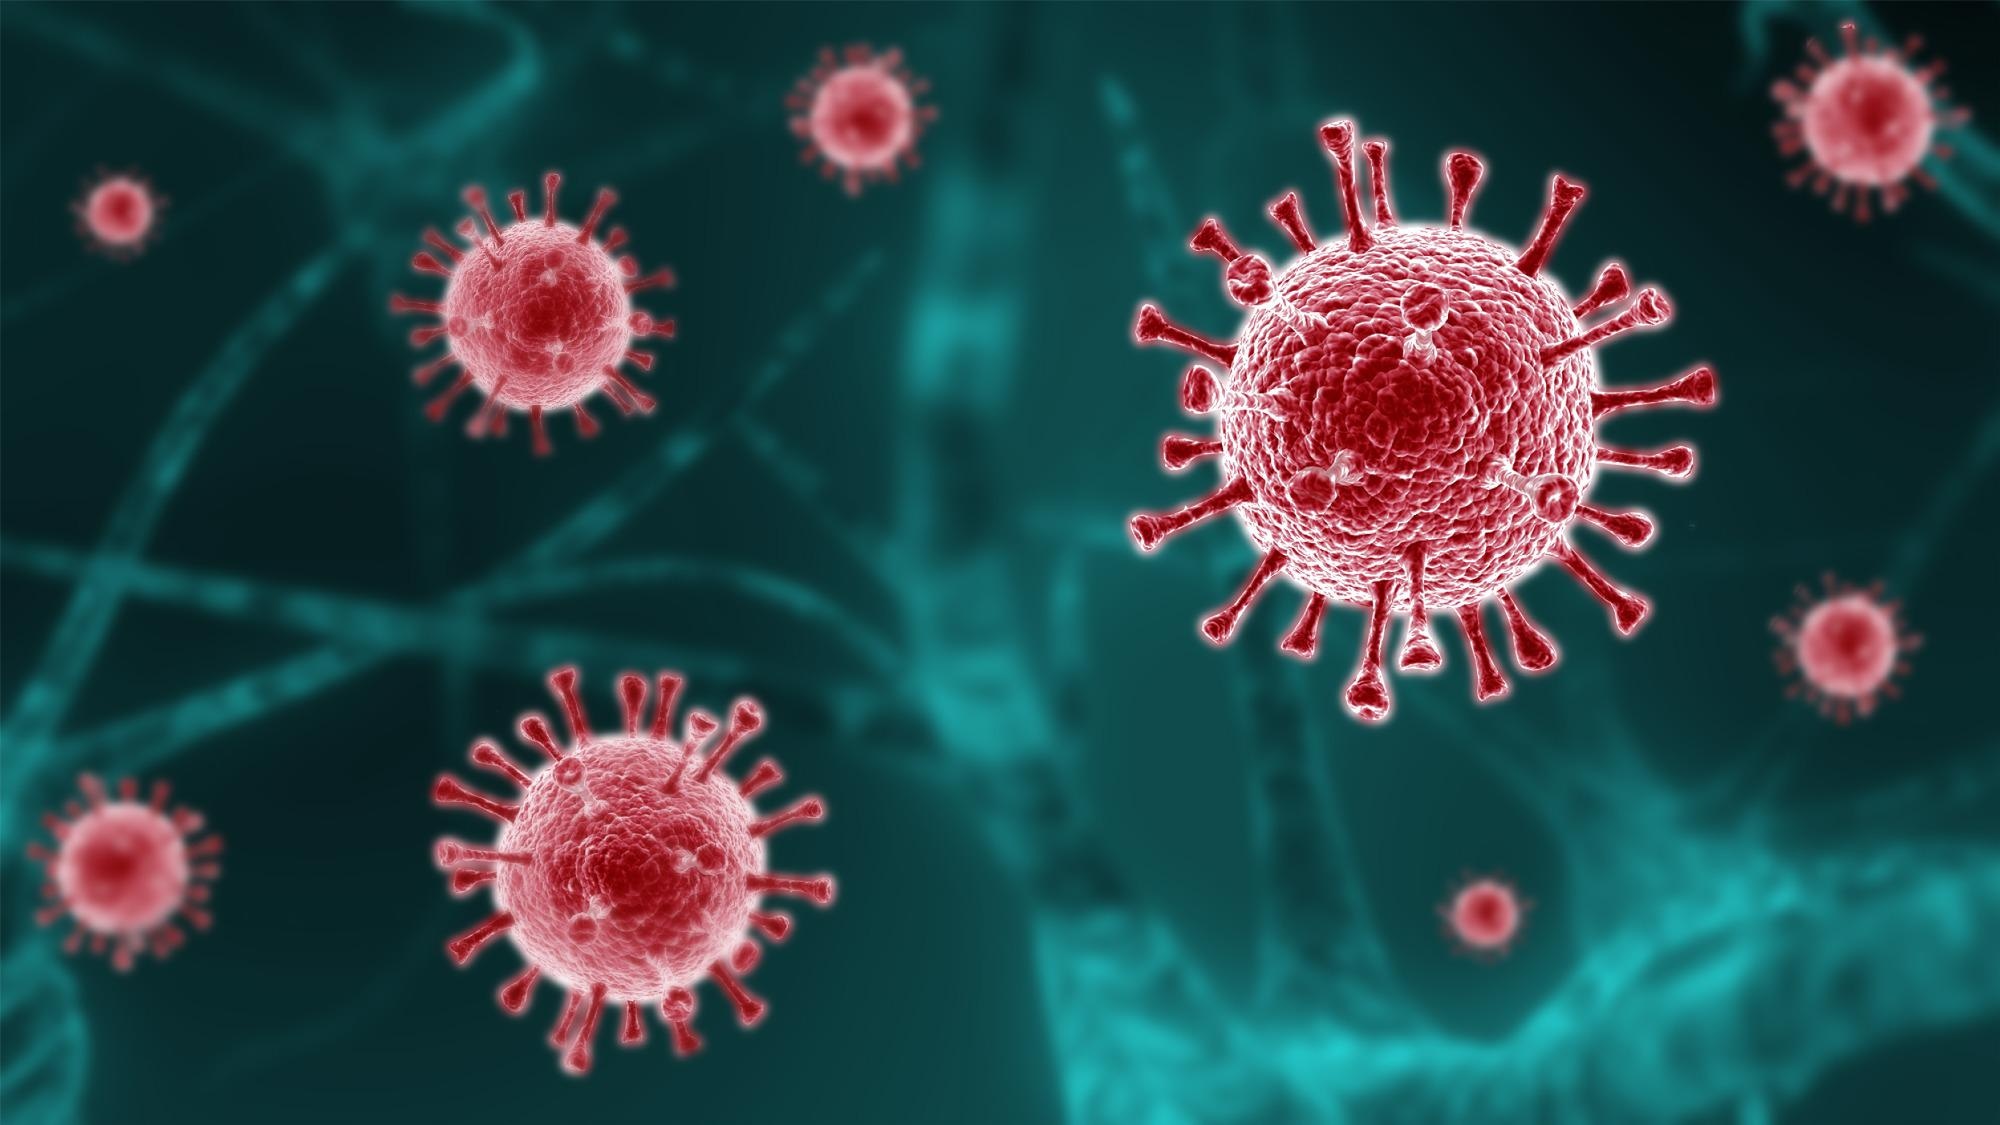 Study: Predictors of all-cause mortality among patients hospitalized with influenza, respiratory syncytial virus, or SARS-CoV-2. Image Credit: Red-Diamond / Shutterstock